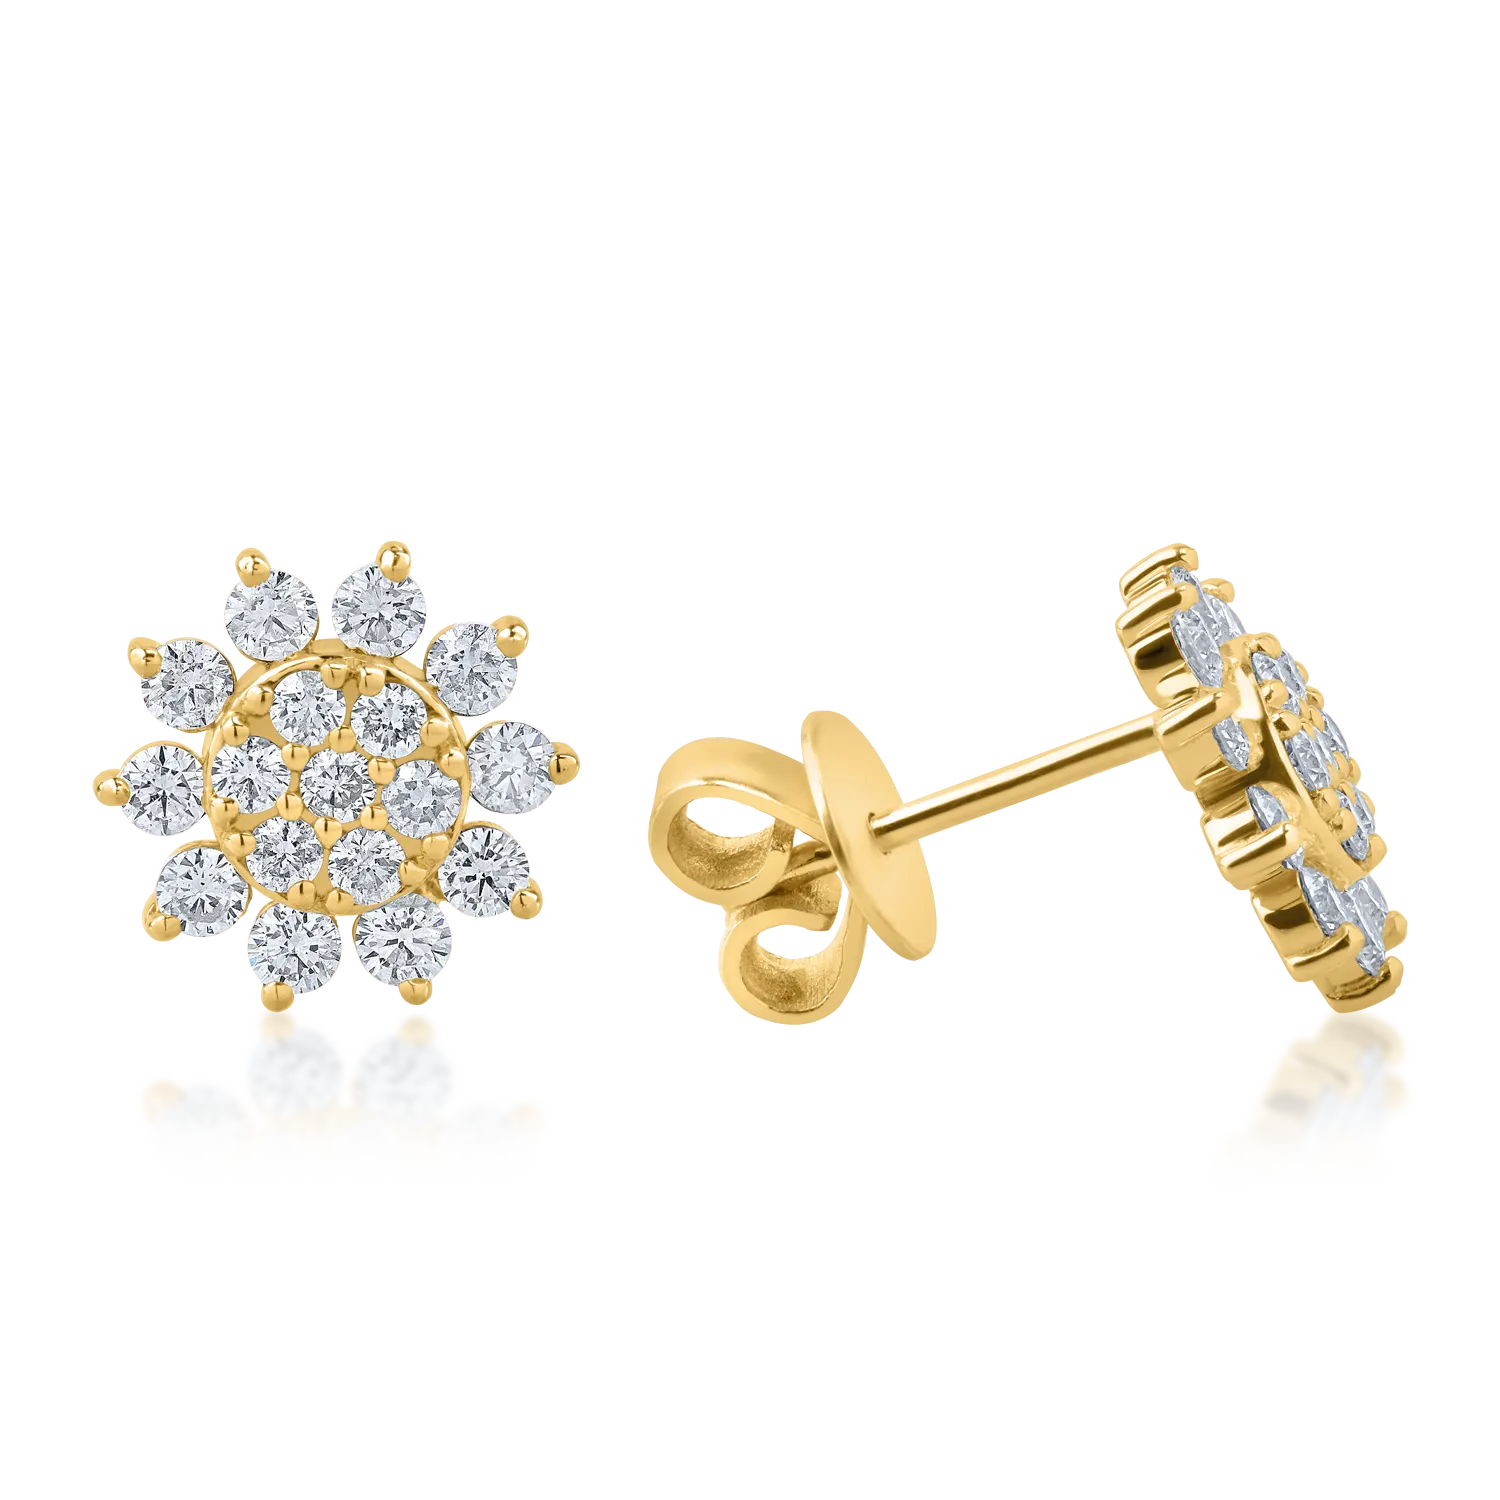 Yellow gold earrings with 1.02ct diamonds